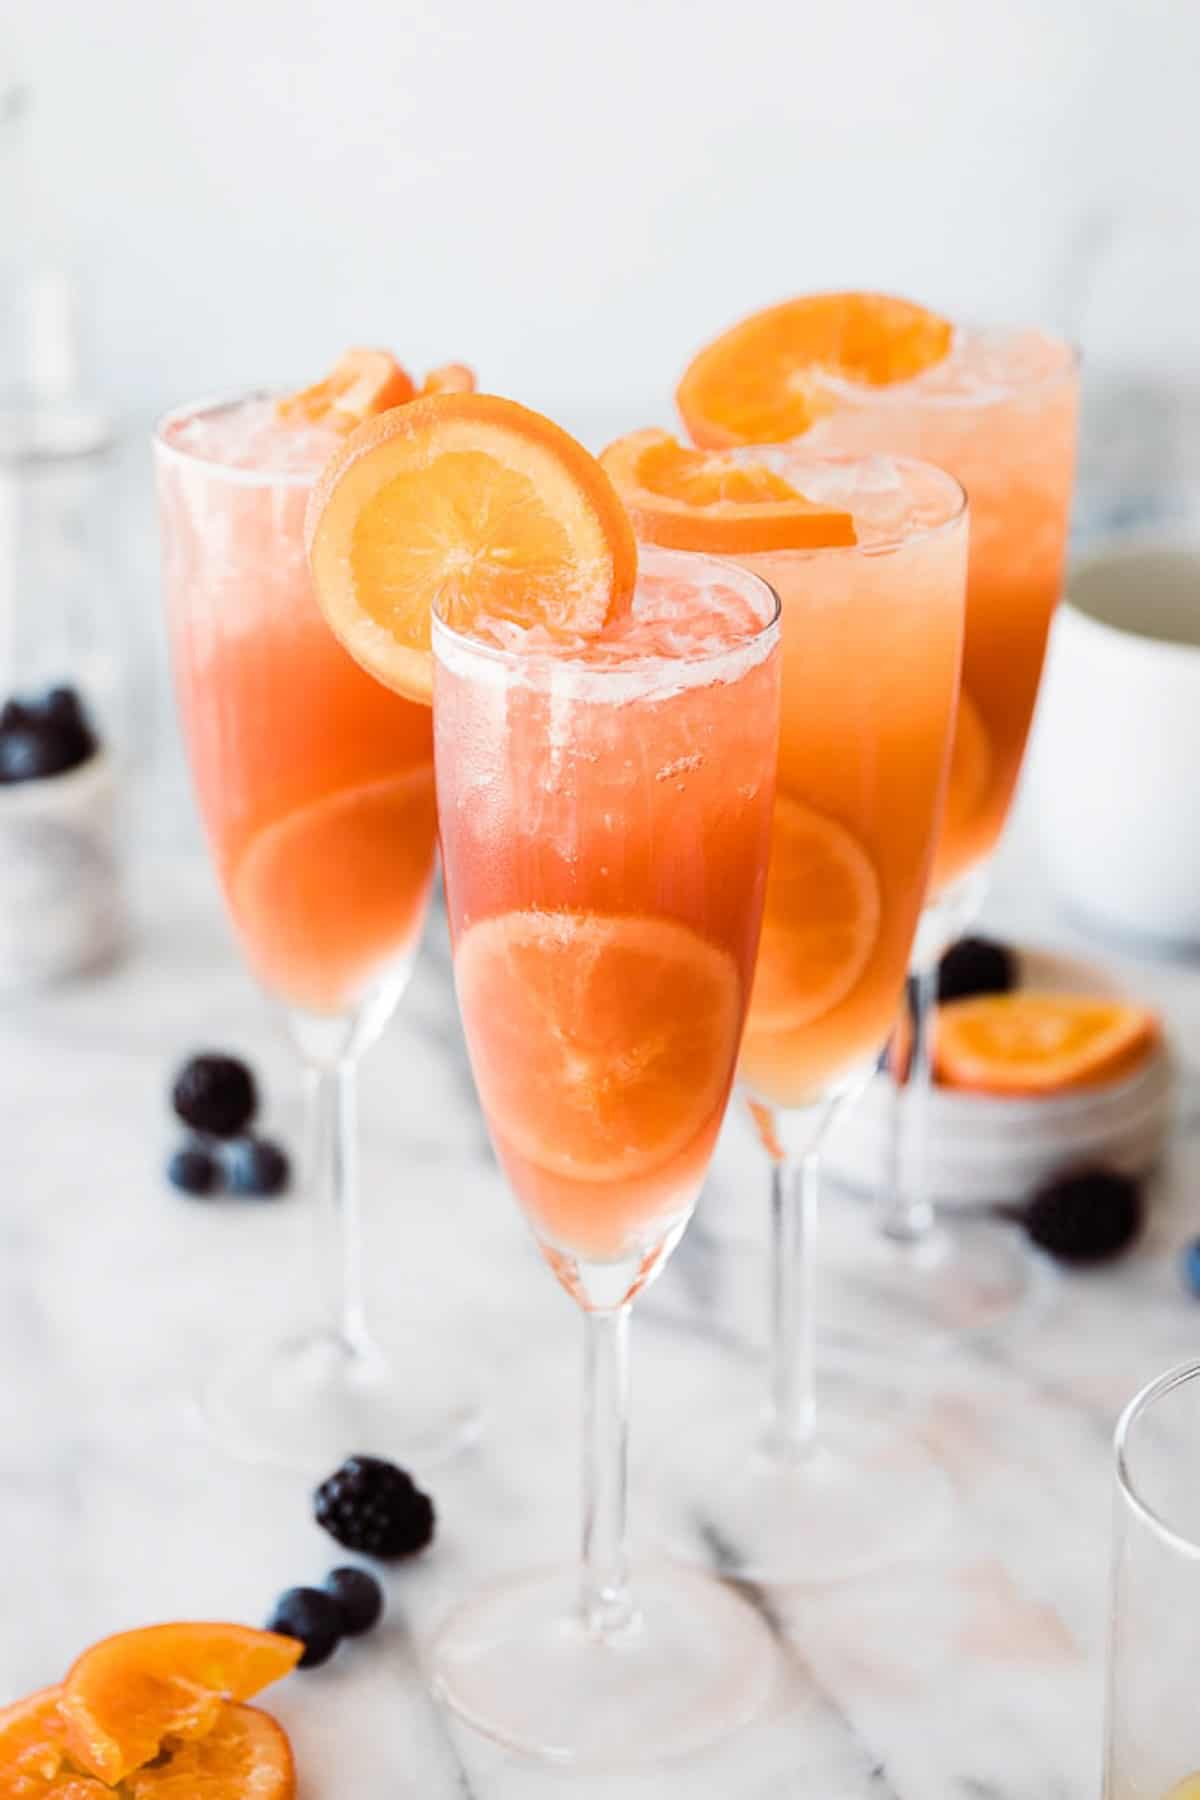 Cranberry mimosa mocktails on the table with orange slices on the glass.